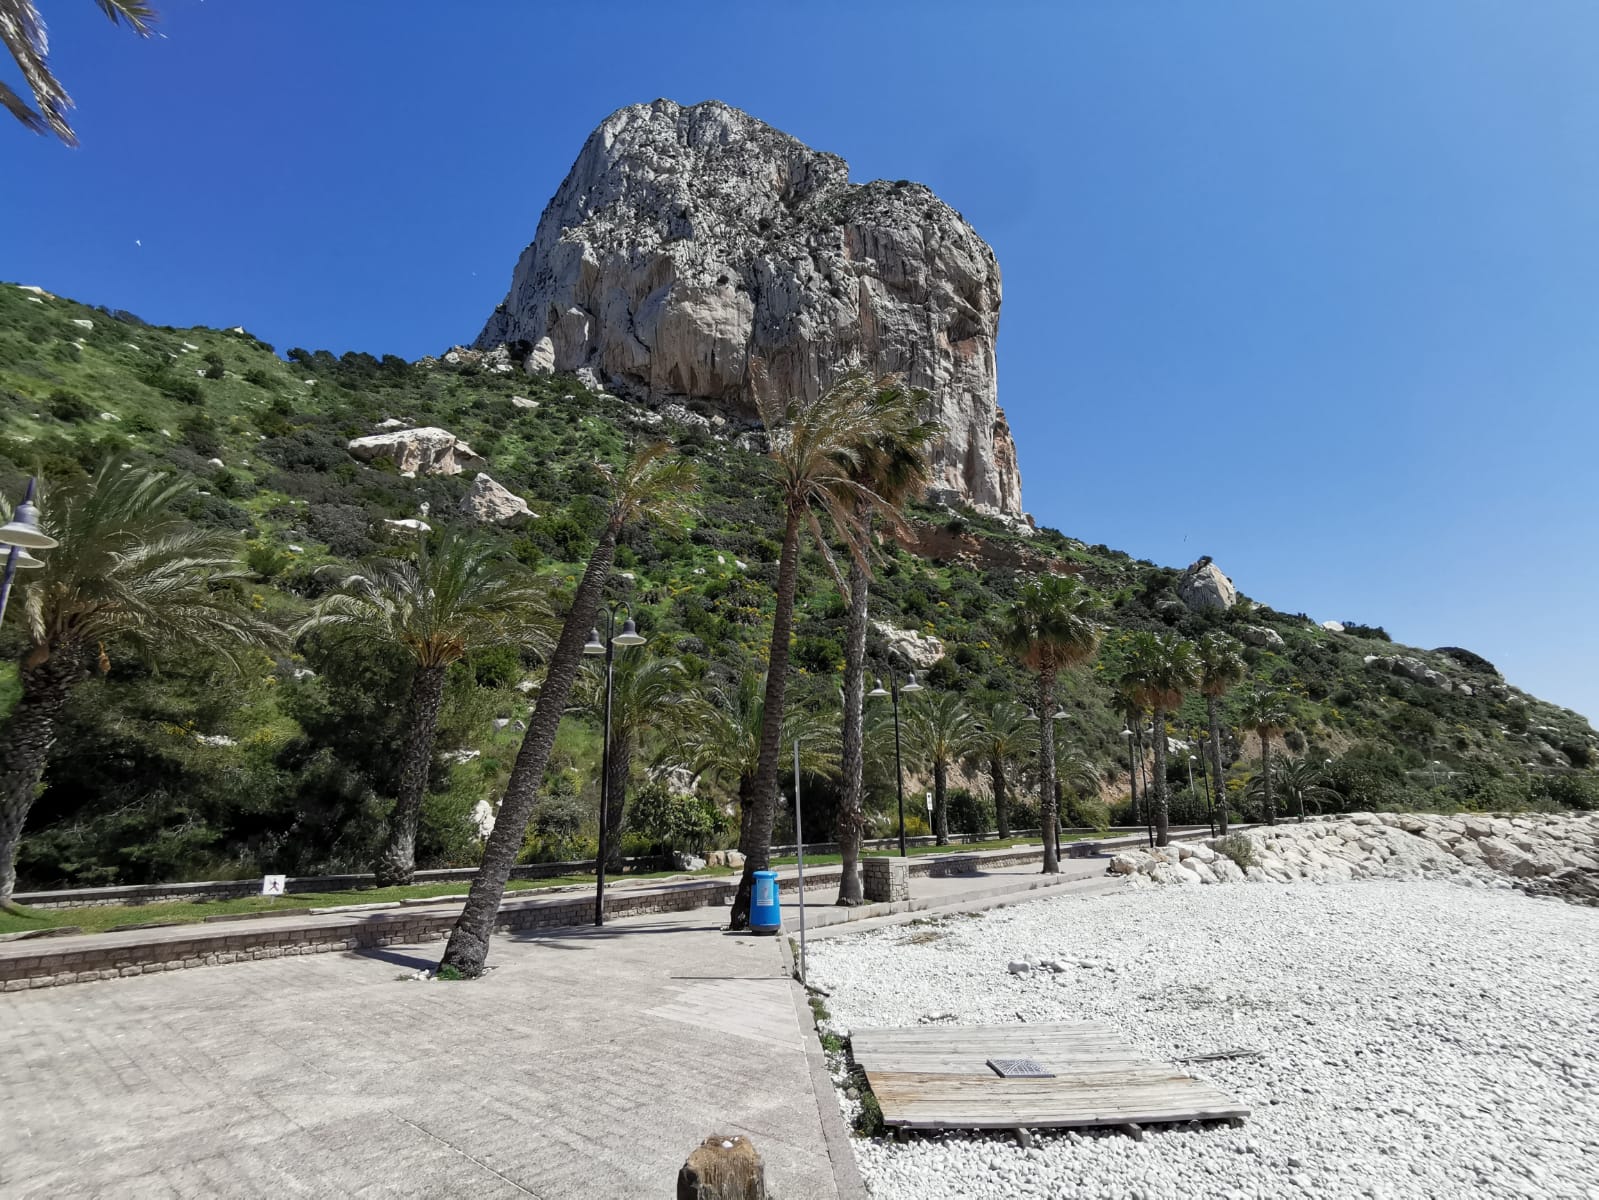 Apartment for sale in port area, Calpe